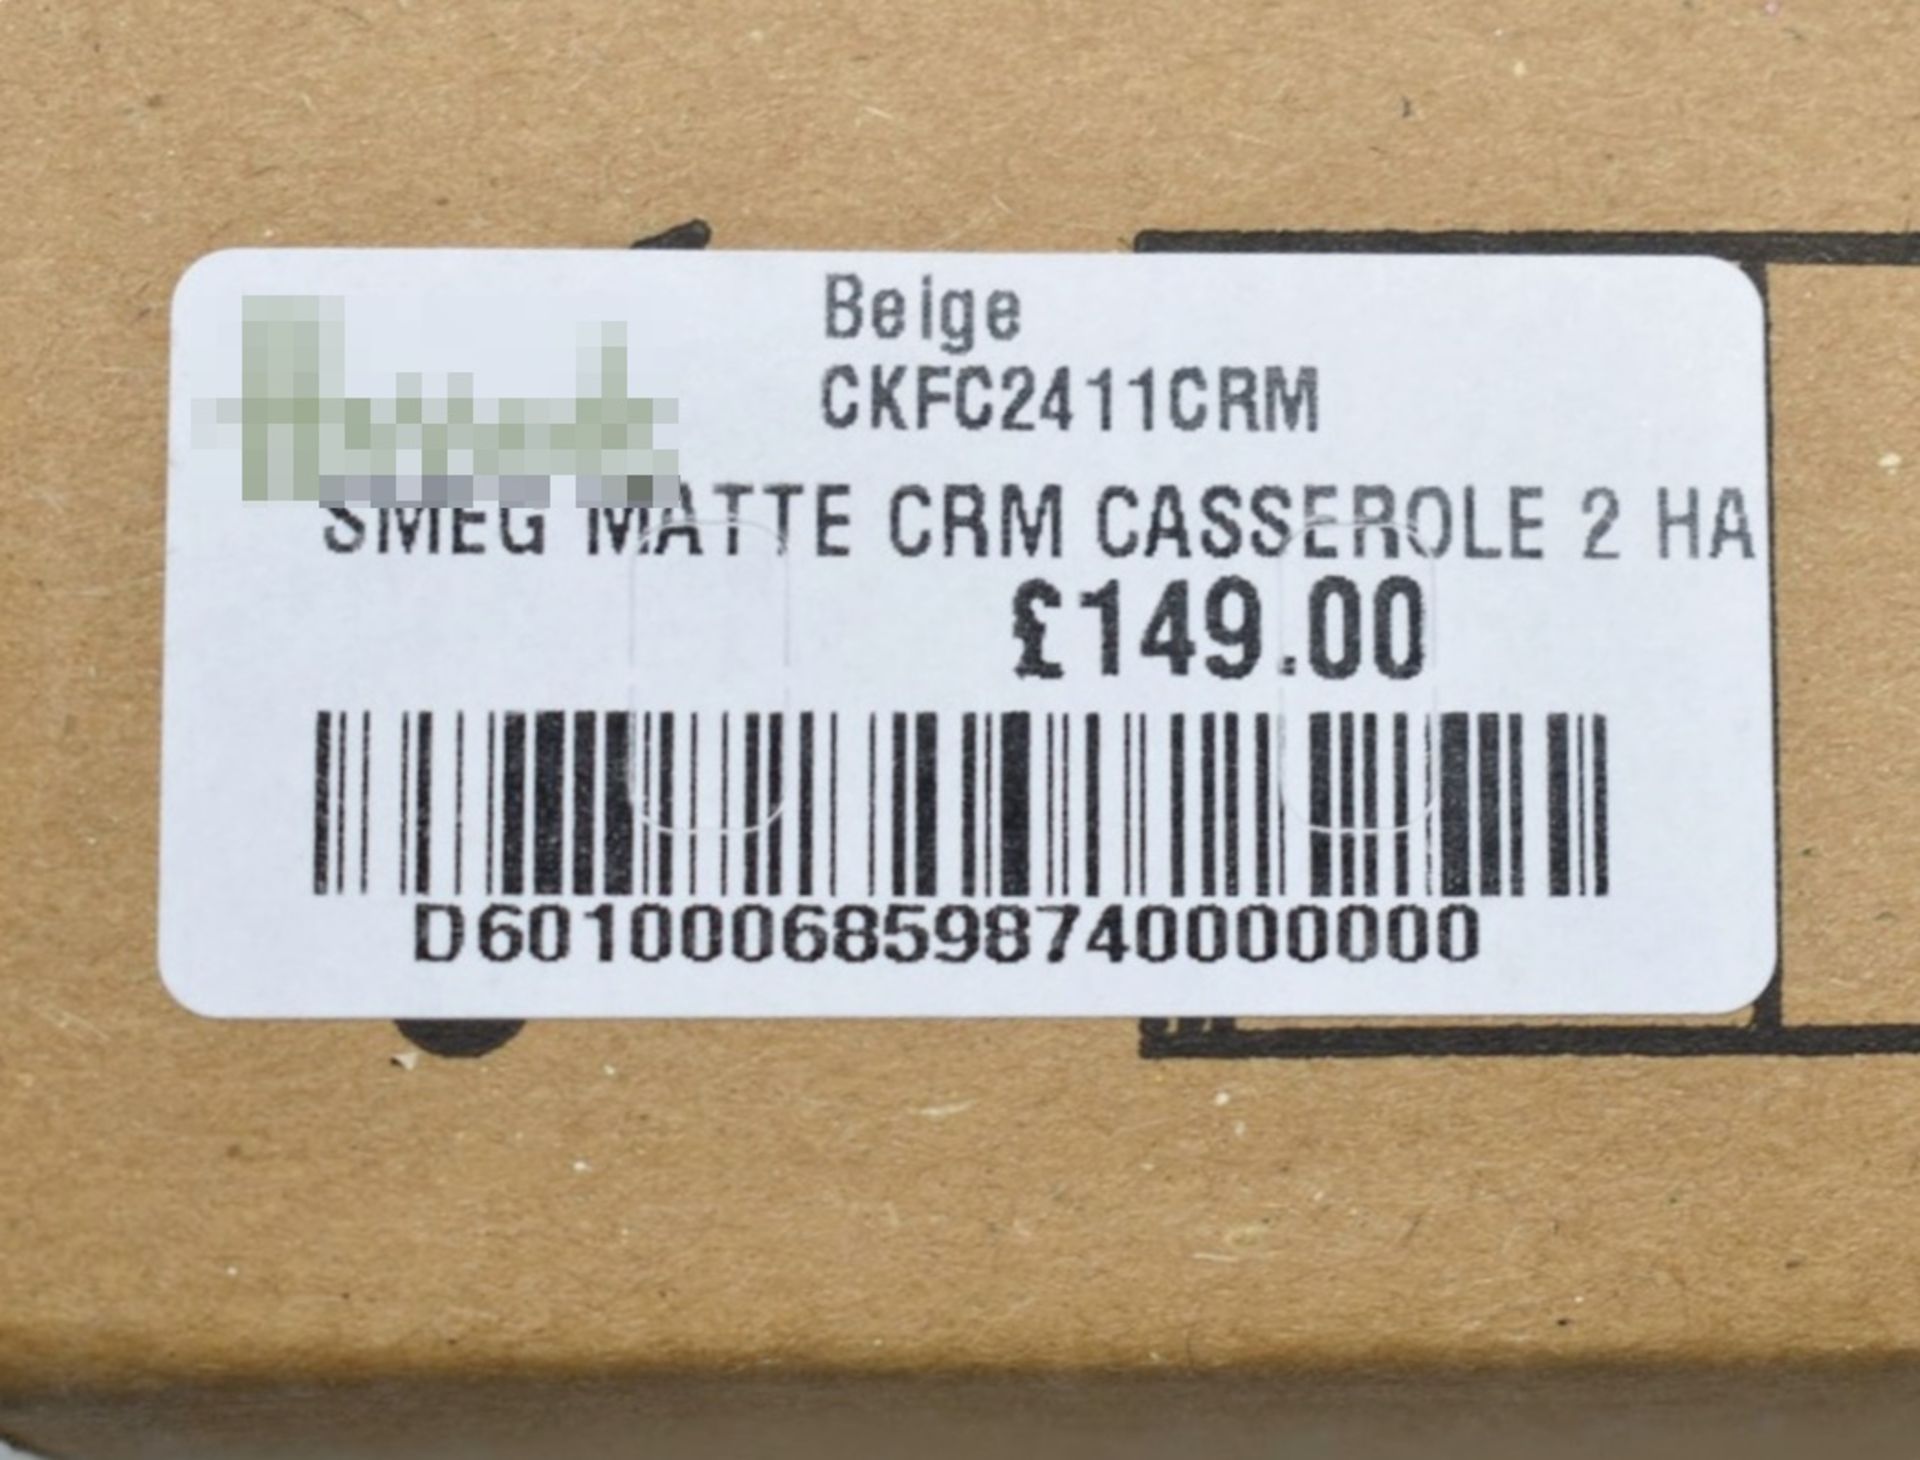 1 x SMEG 50s-Style Casserole Pan with Lid in Matte Cream (24cm) - Original Price £169.95 - Image 12 of 18